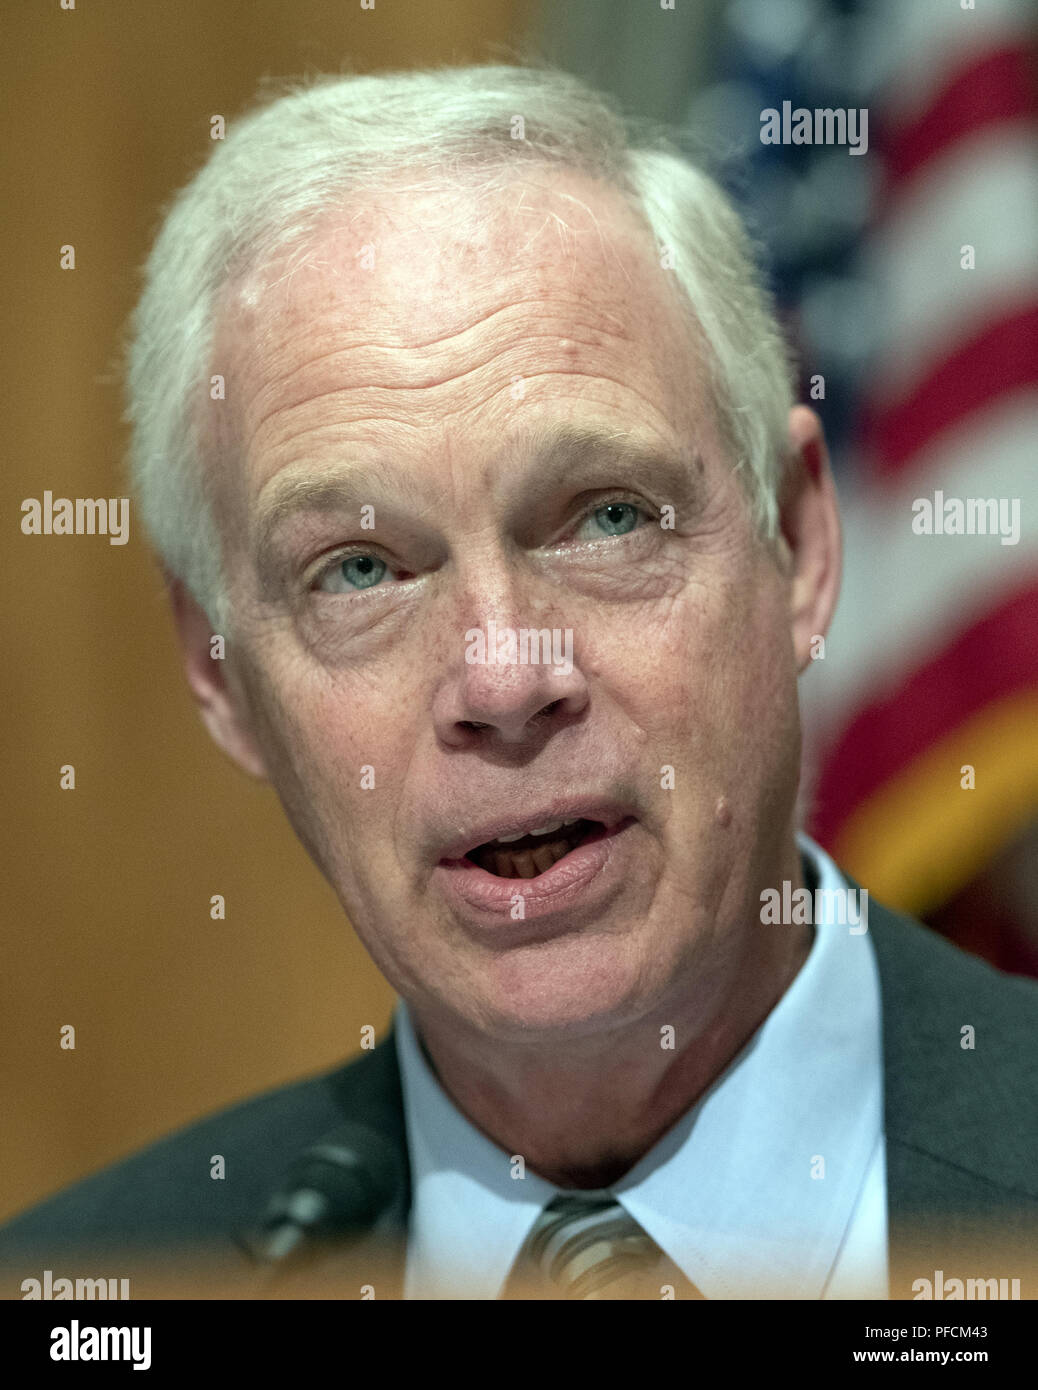 Washington, District of Columbia, USA. 21st Aug, 2018. United States Senator Ron Johnson, Chairman, US Senate Committee on Homeland Security & Governmental Affairs, makes an opening statement prior to hearing testimony on ''Examining CMS's Efforts to Fight Medicaid Fraud and Overpayments'' on Capitol Hill in Washington, DC on Tuesday, August 21, 2018 Credit: Ron Sachs/CNP/ZUMA Wire/Alamy Live News Stock Photo